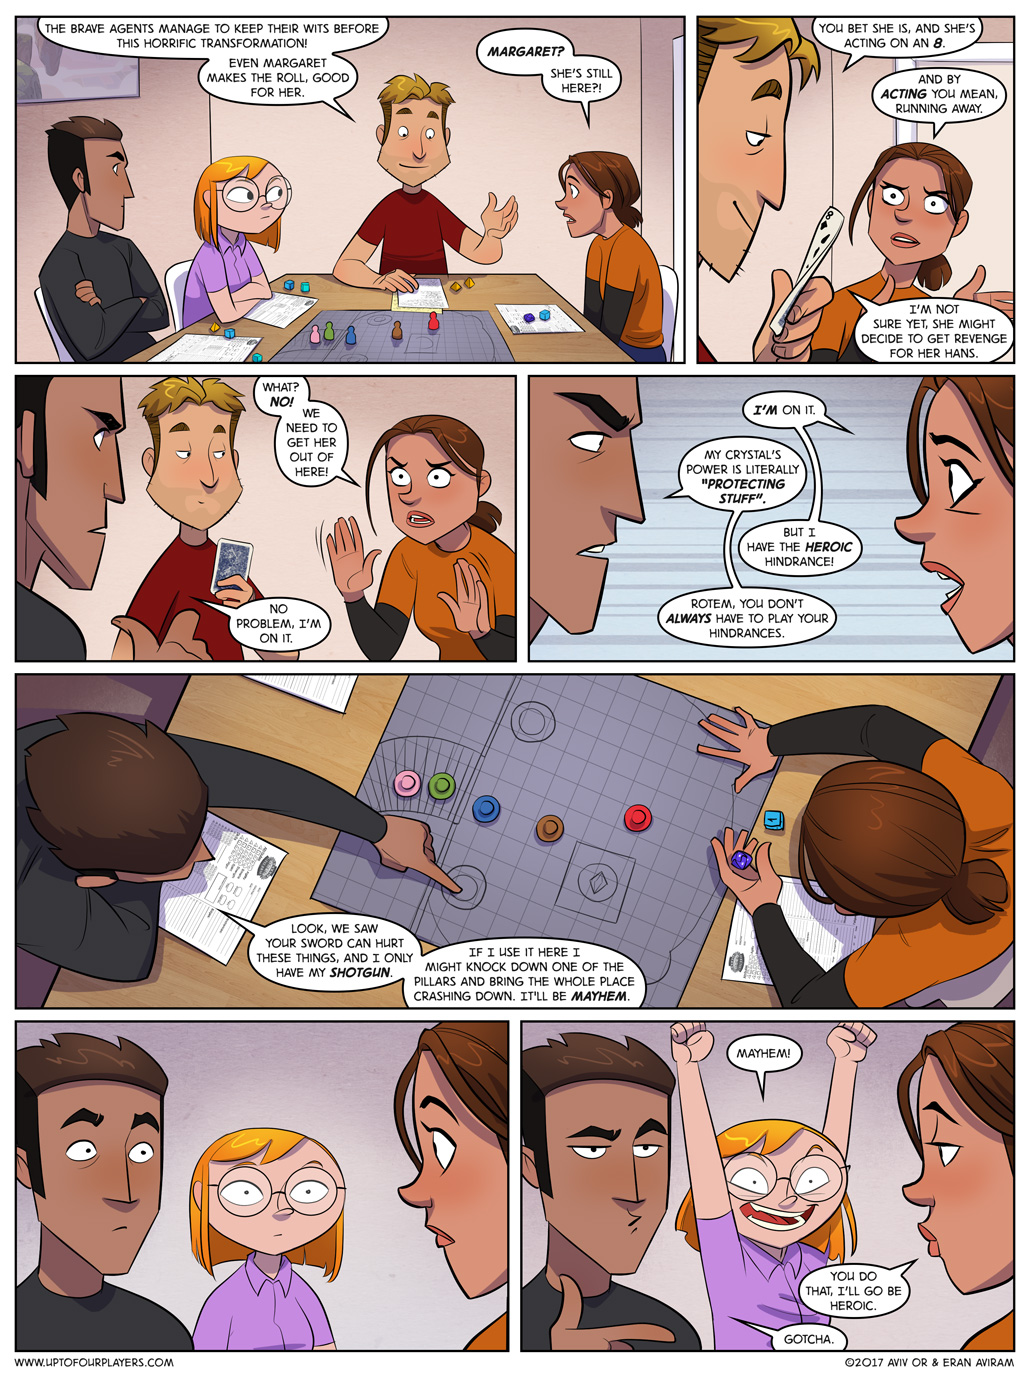 Wild at Heart – Page 17